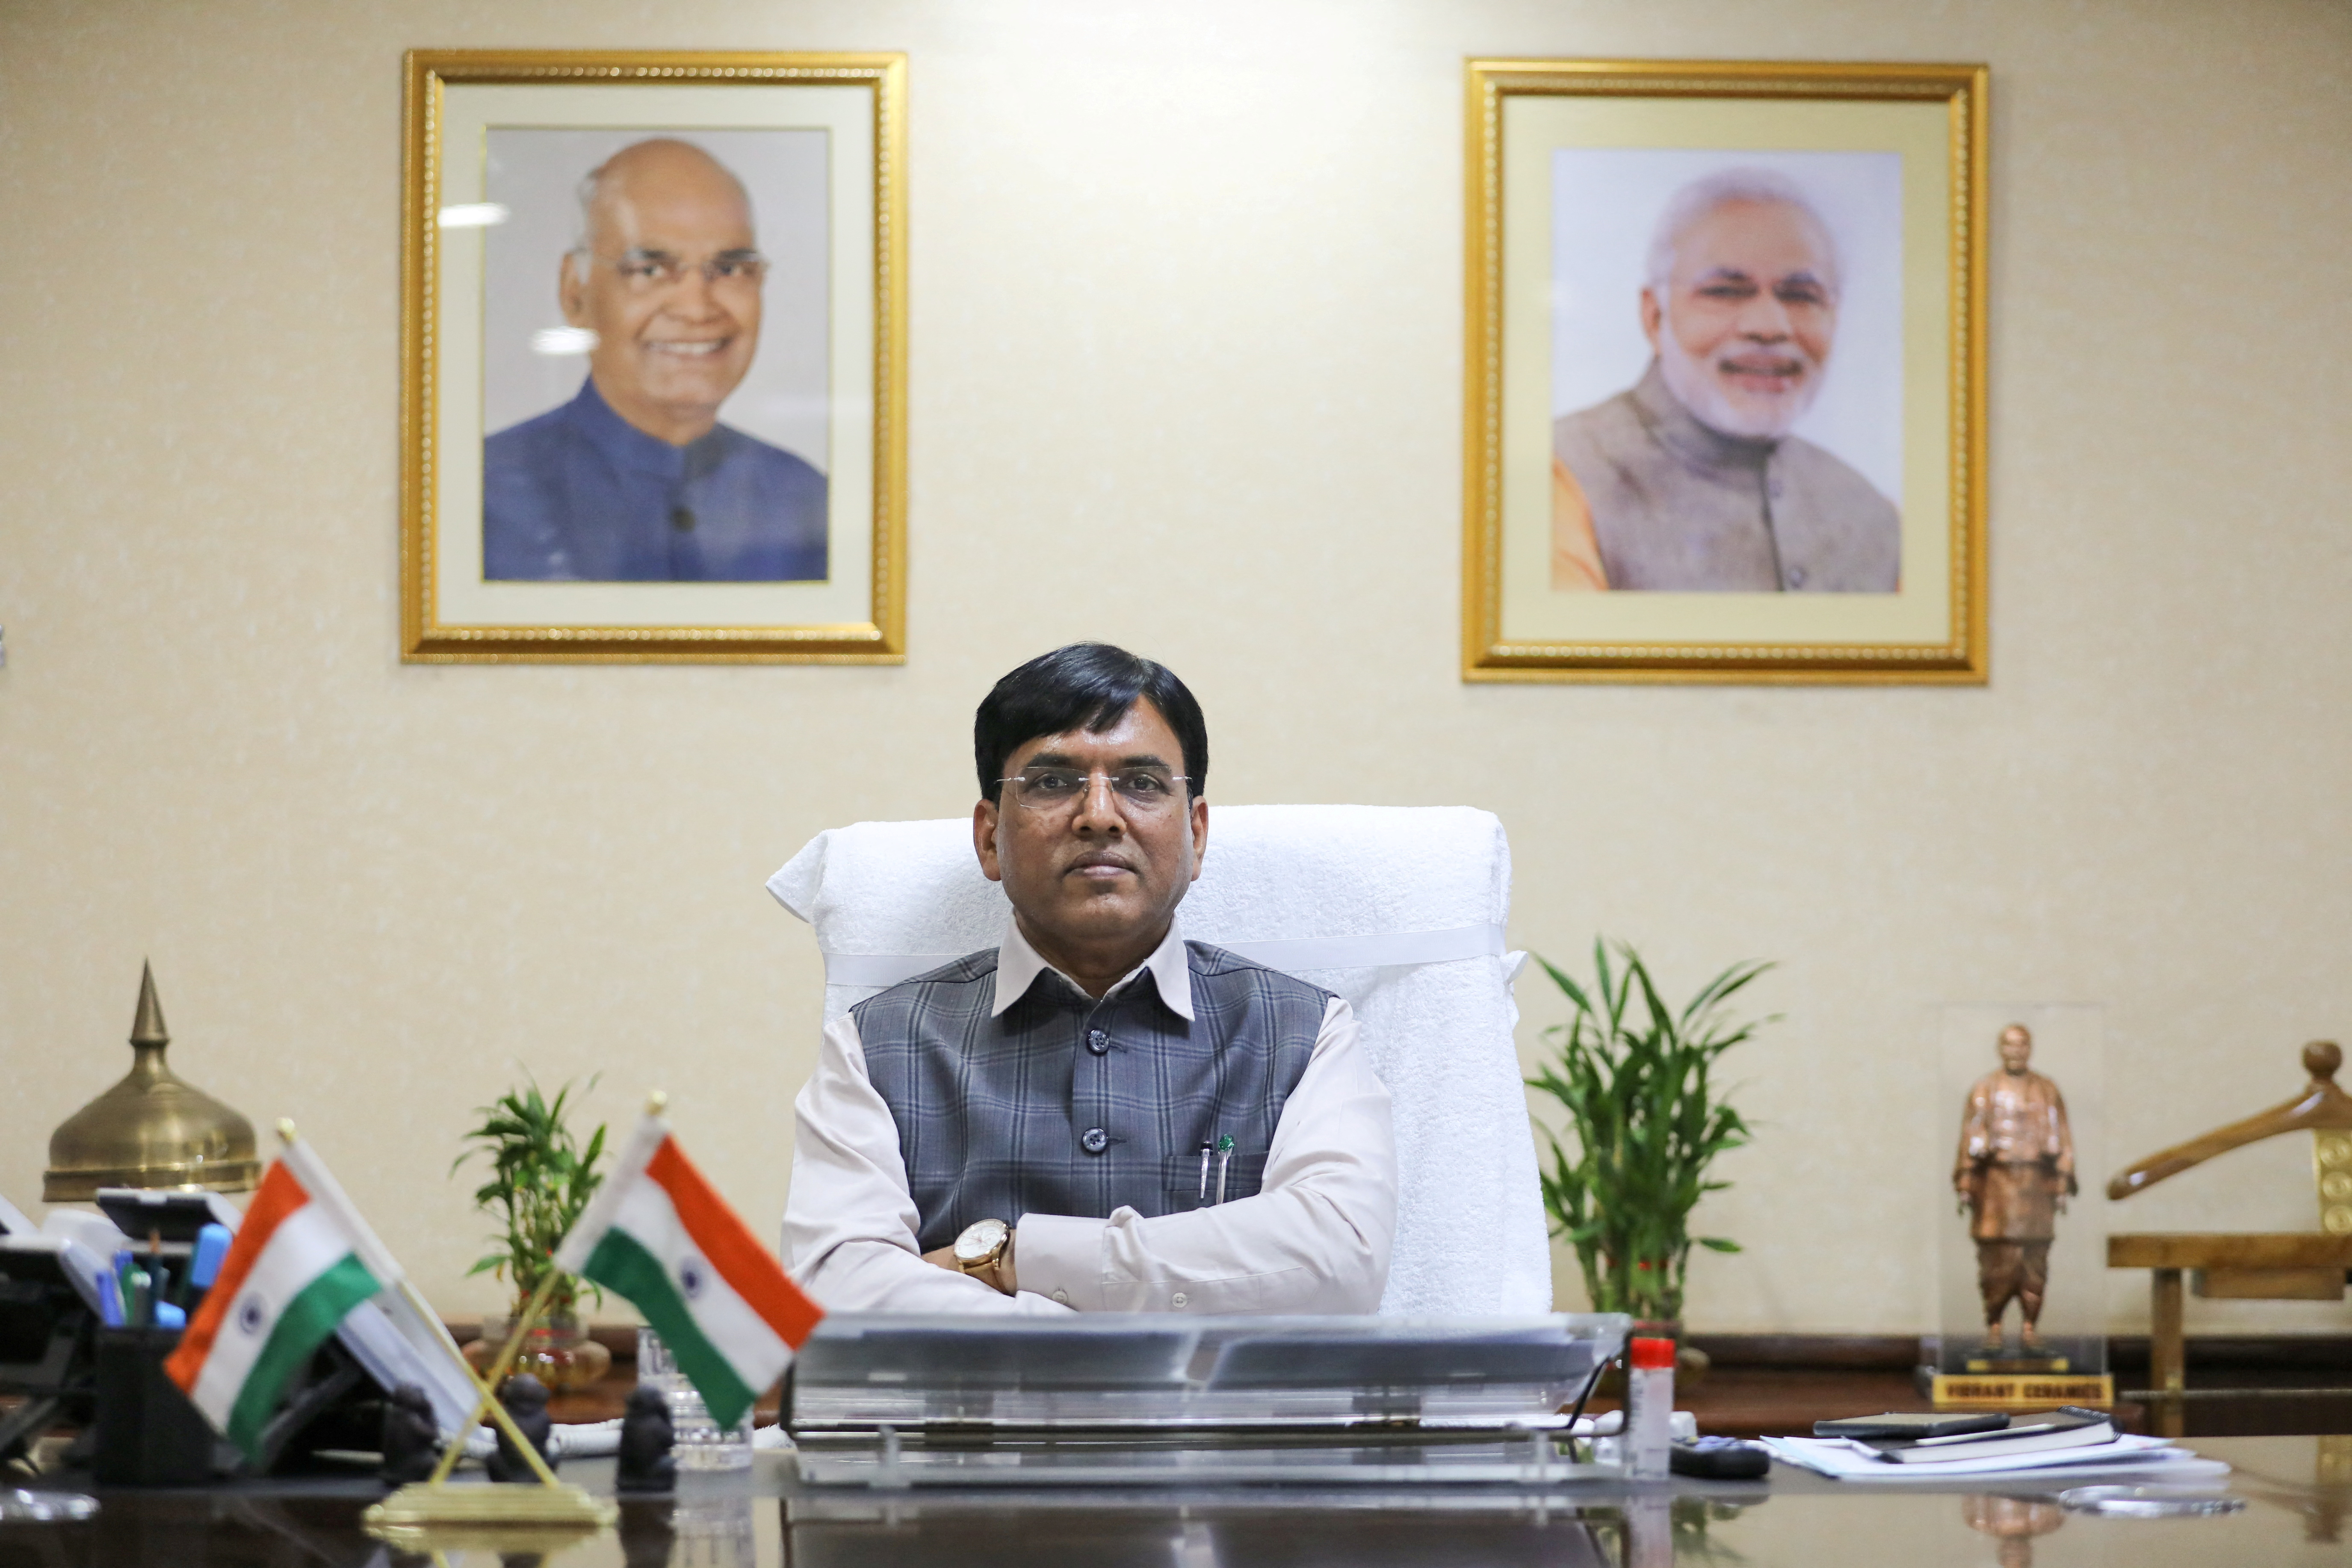 Shipping Minister Mansukh Mandaviya poses for a picture after his interview with Reuters, in New Delhi